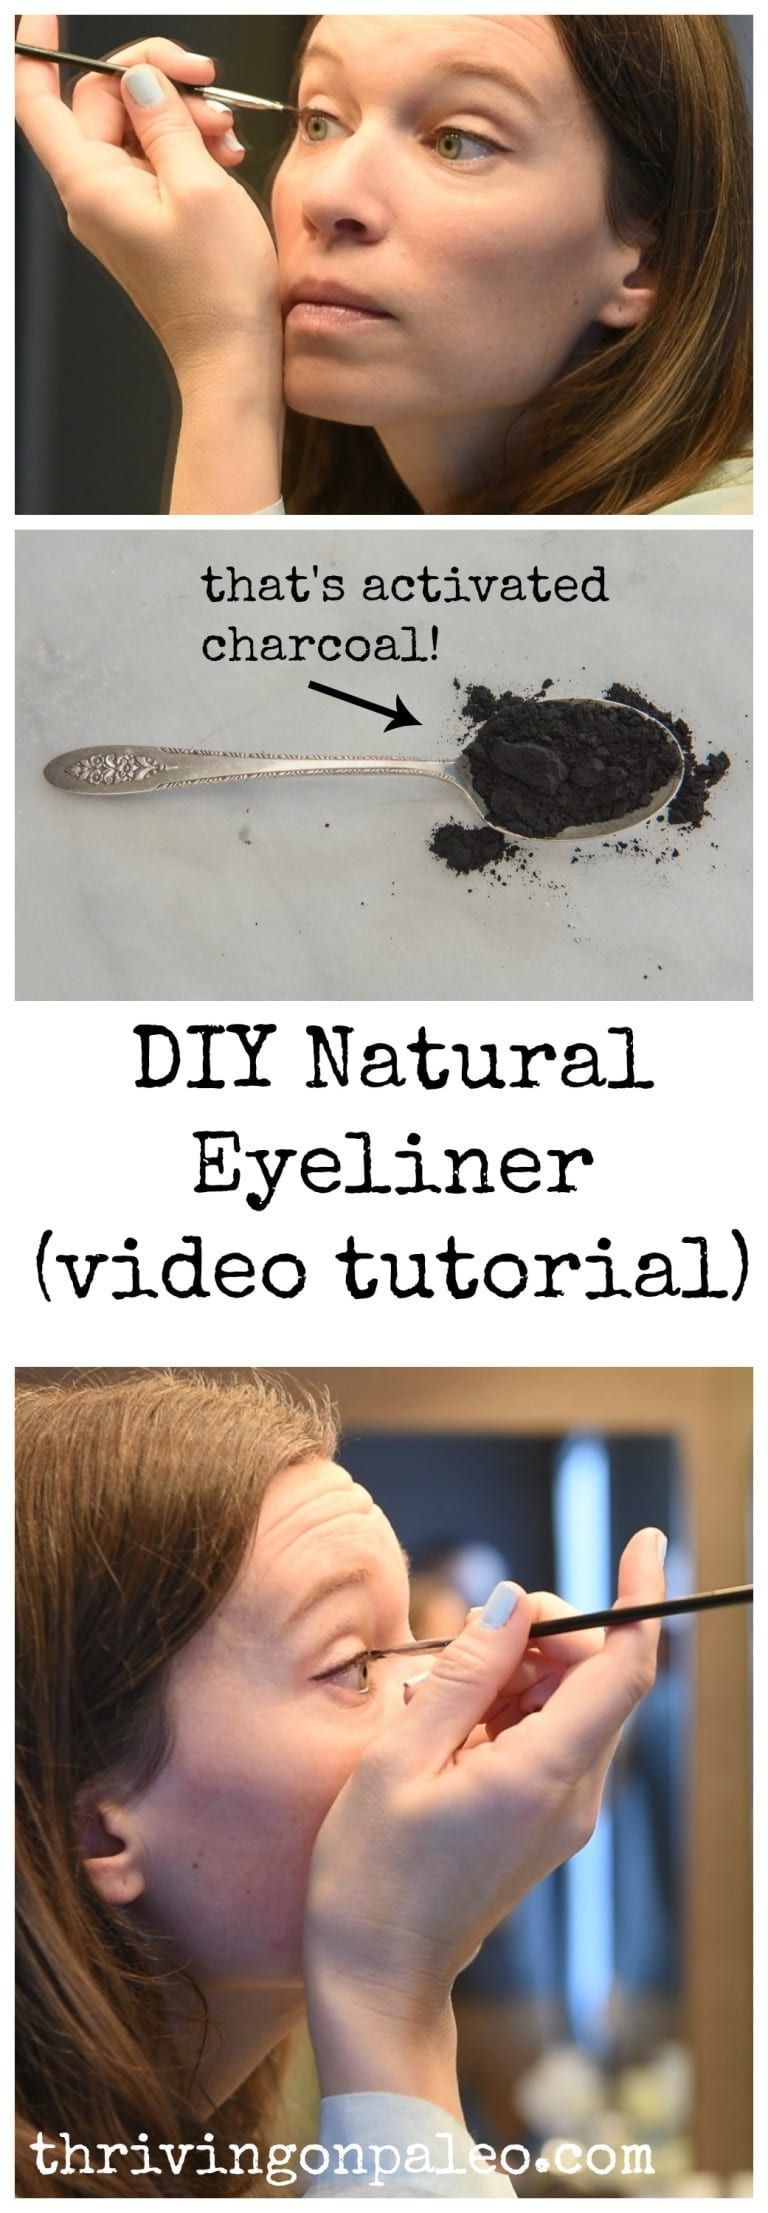 DIY Natural Eyeliner - Thriving On Paleo | AIP & Paleo Recipes for Autoimmune Disease Relief - DIY Natural Eyeliner - Thriving On Paleo | AIP & Paleo Recipes for Autoimmune Disease Relief -   16 diy Makeup eyeliner ideas